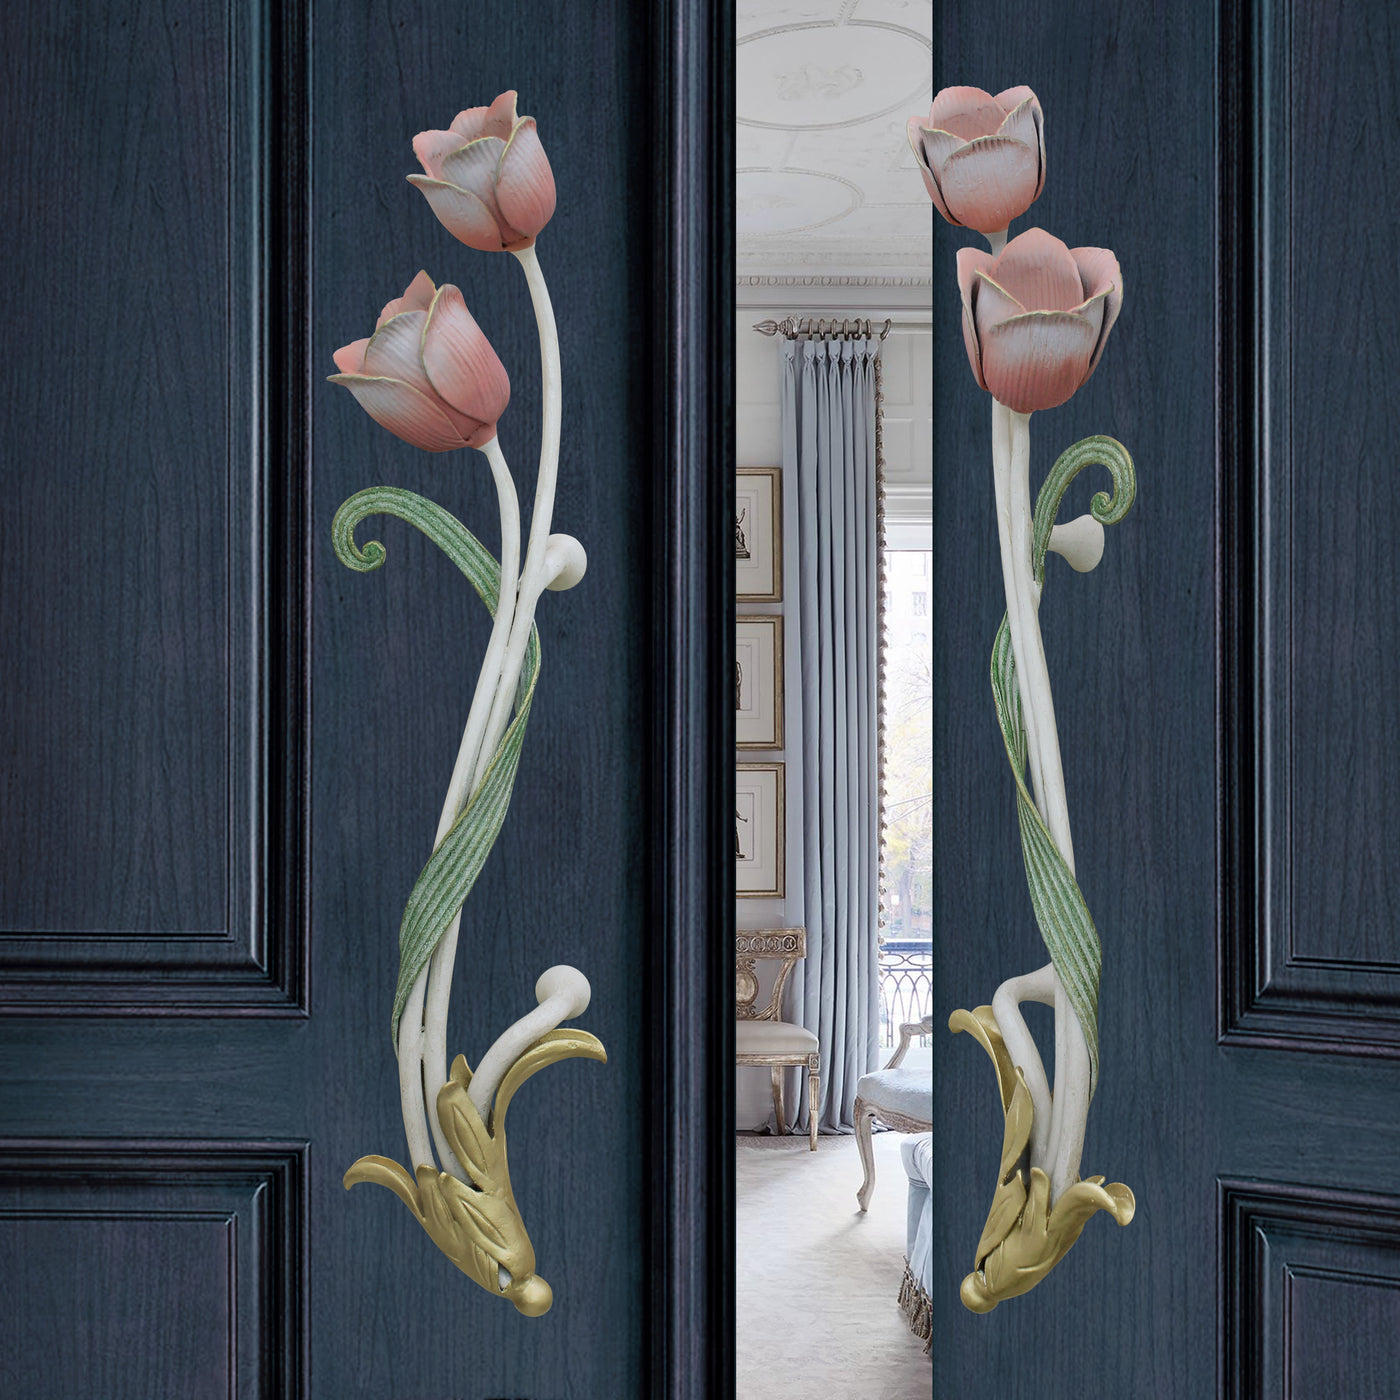 Pair of decorative pull handles inspired by tulips mounted on an opened blue door